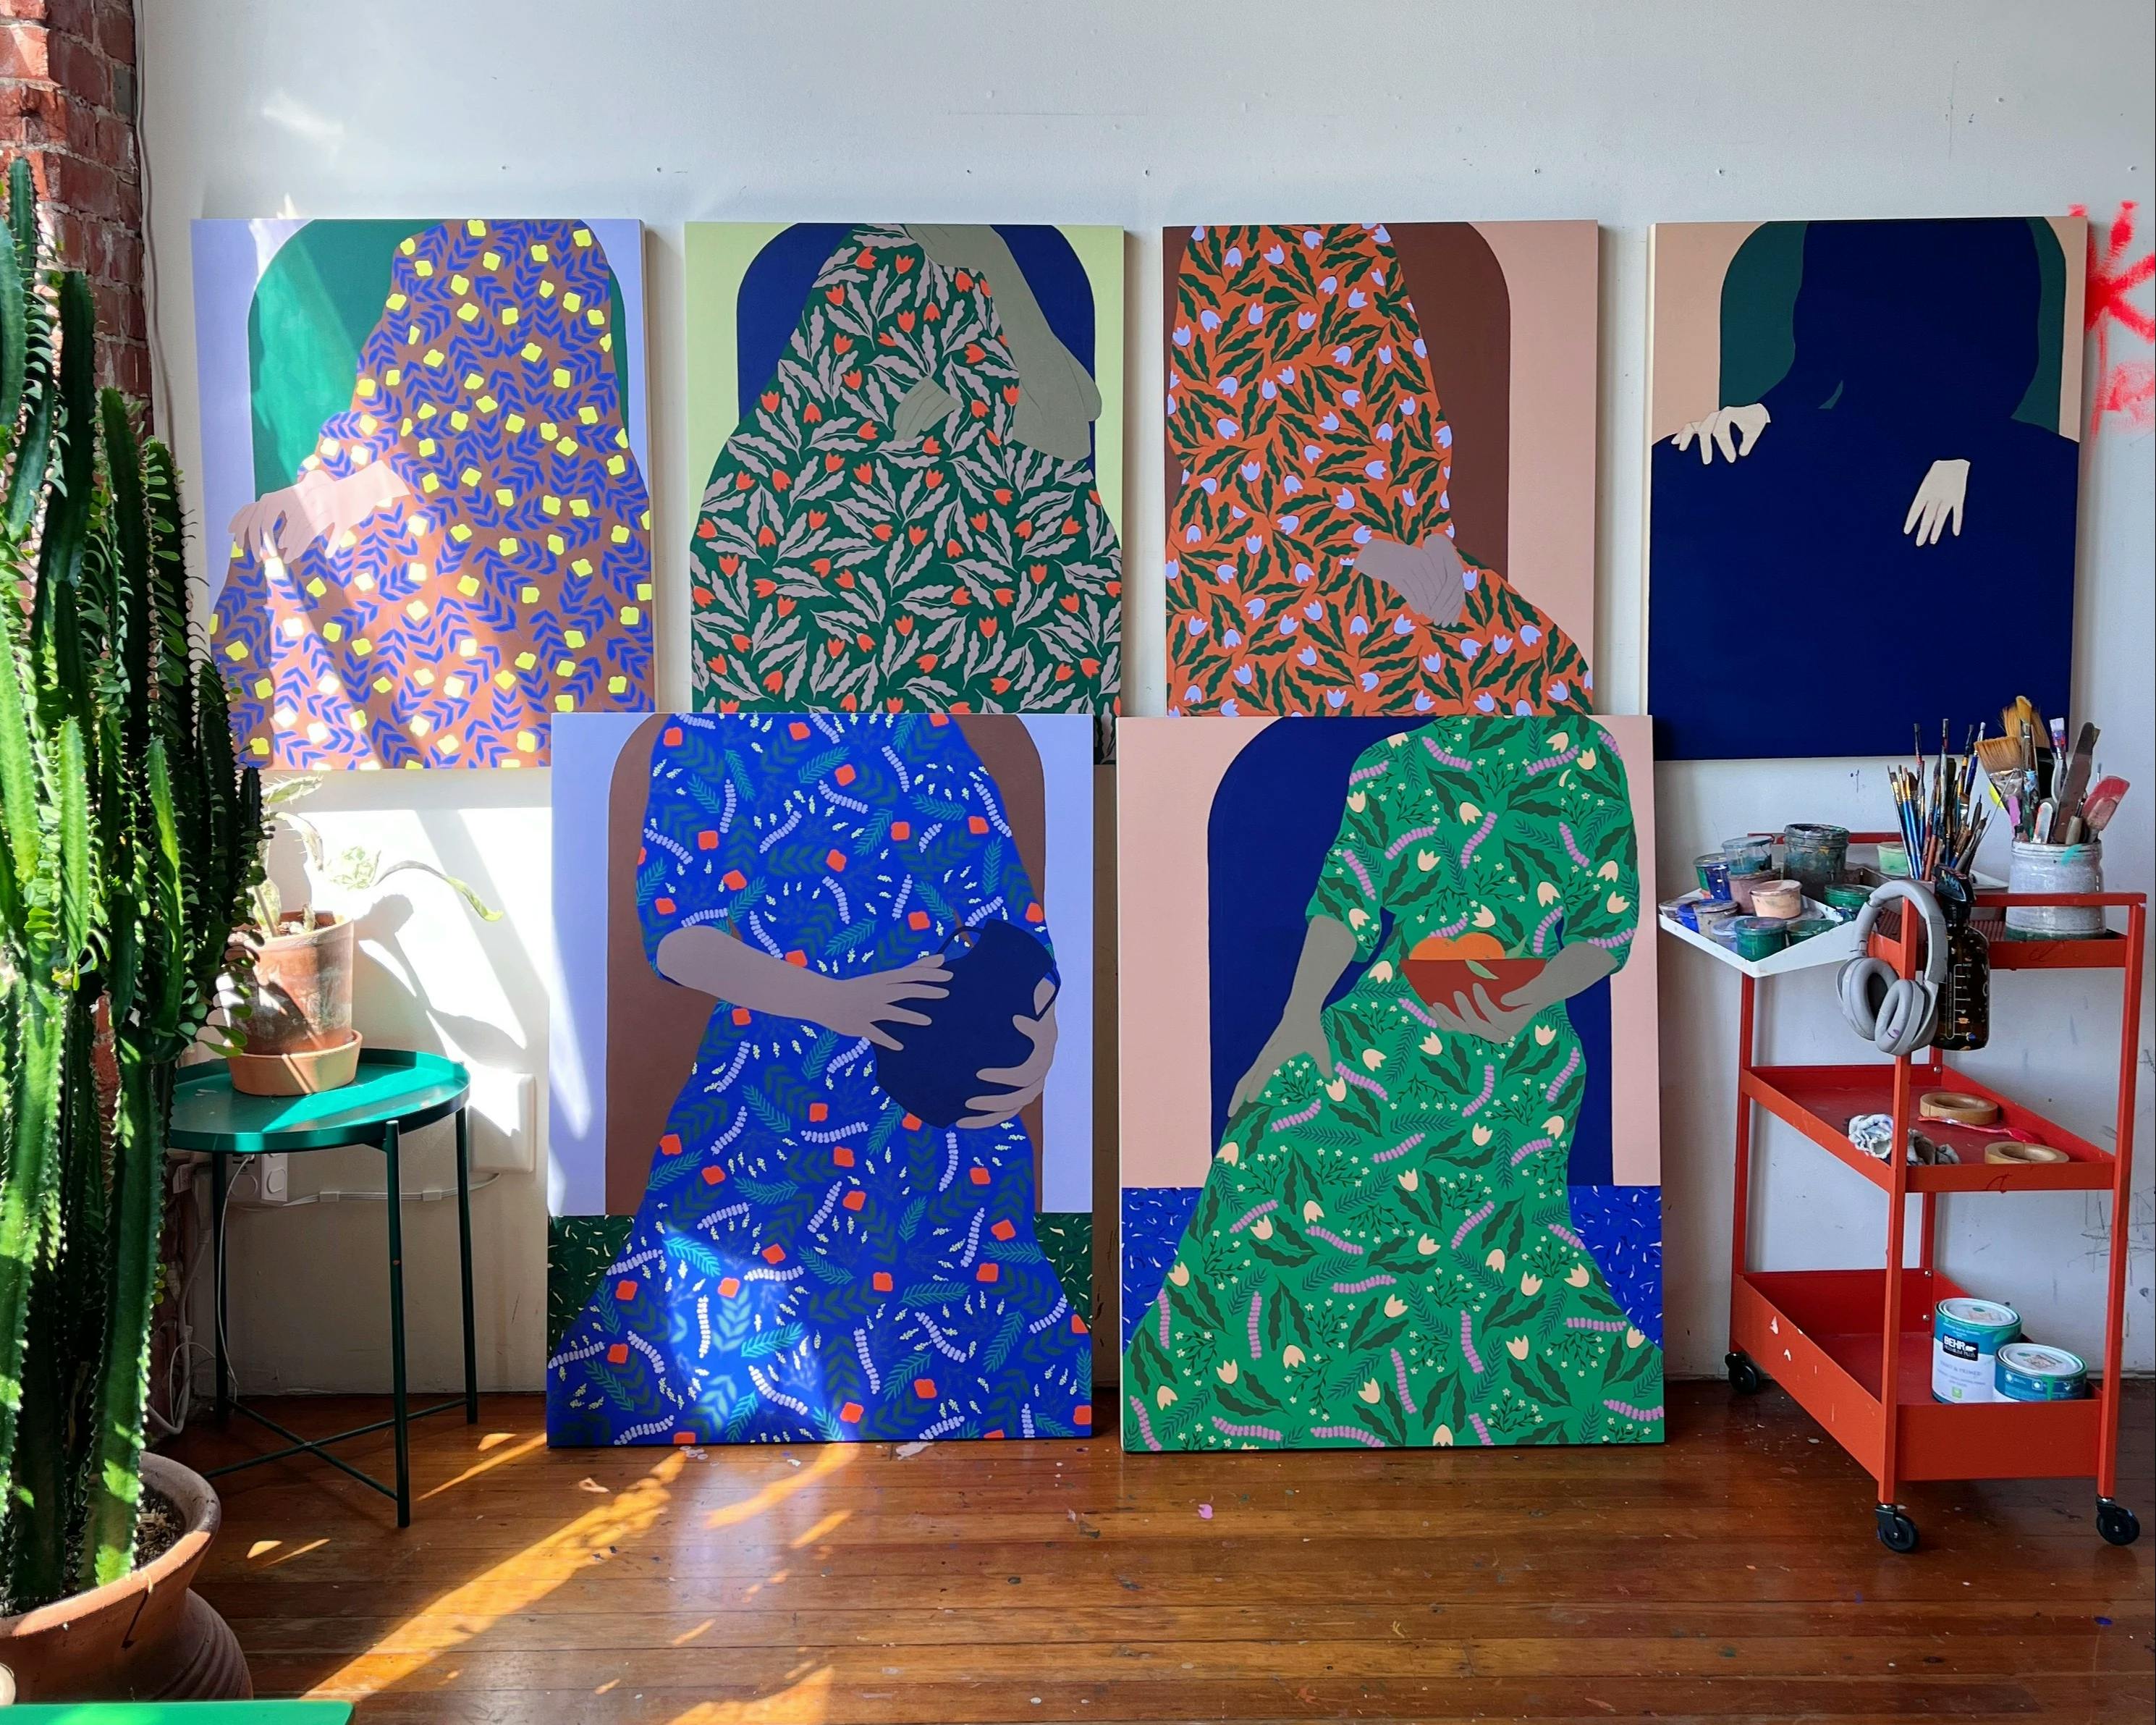 Hand-carved paintings on wood panel of headless women in patterned dress by artist Carmen McNall.